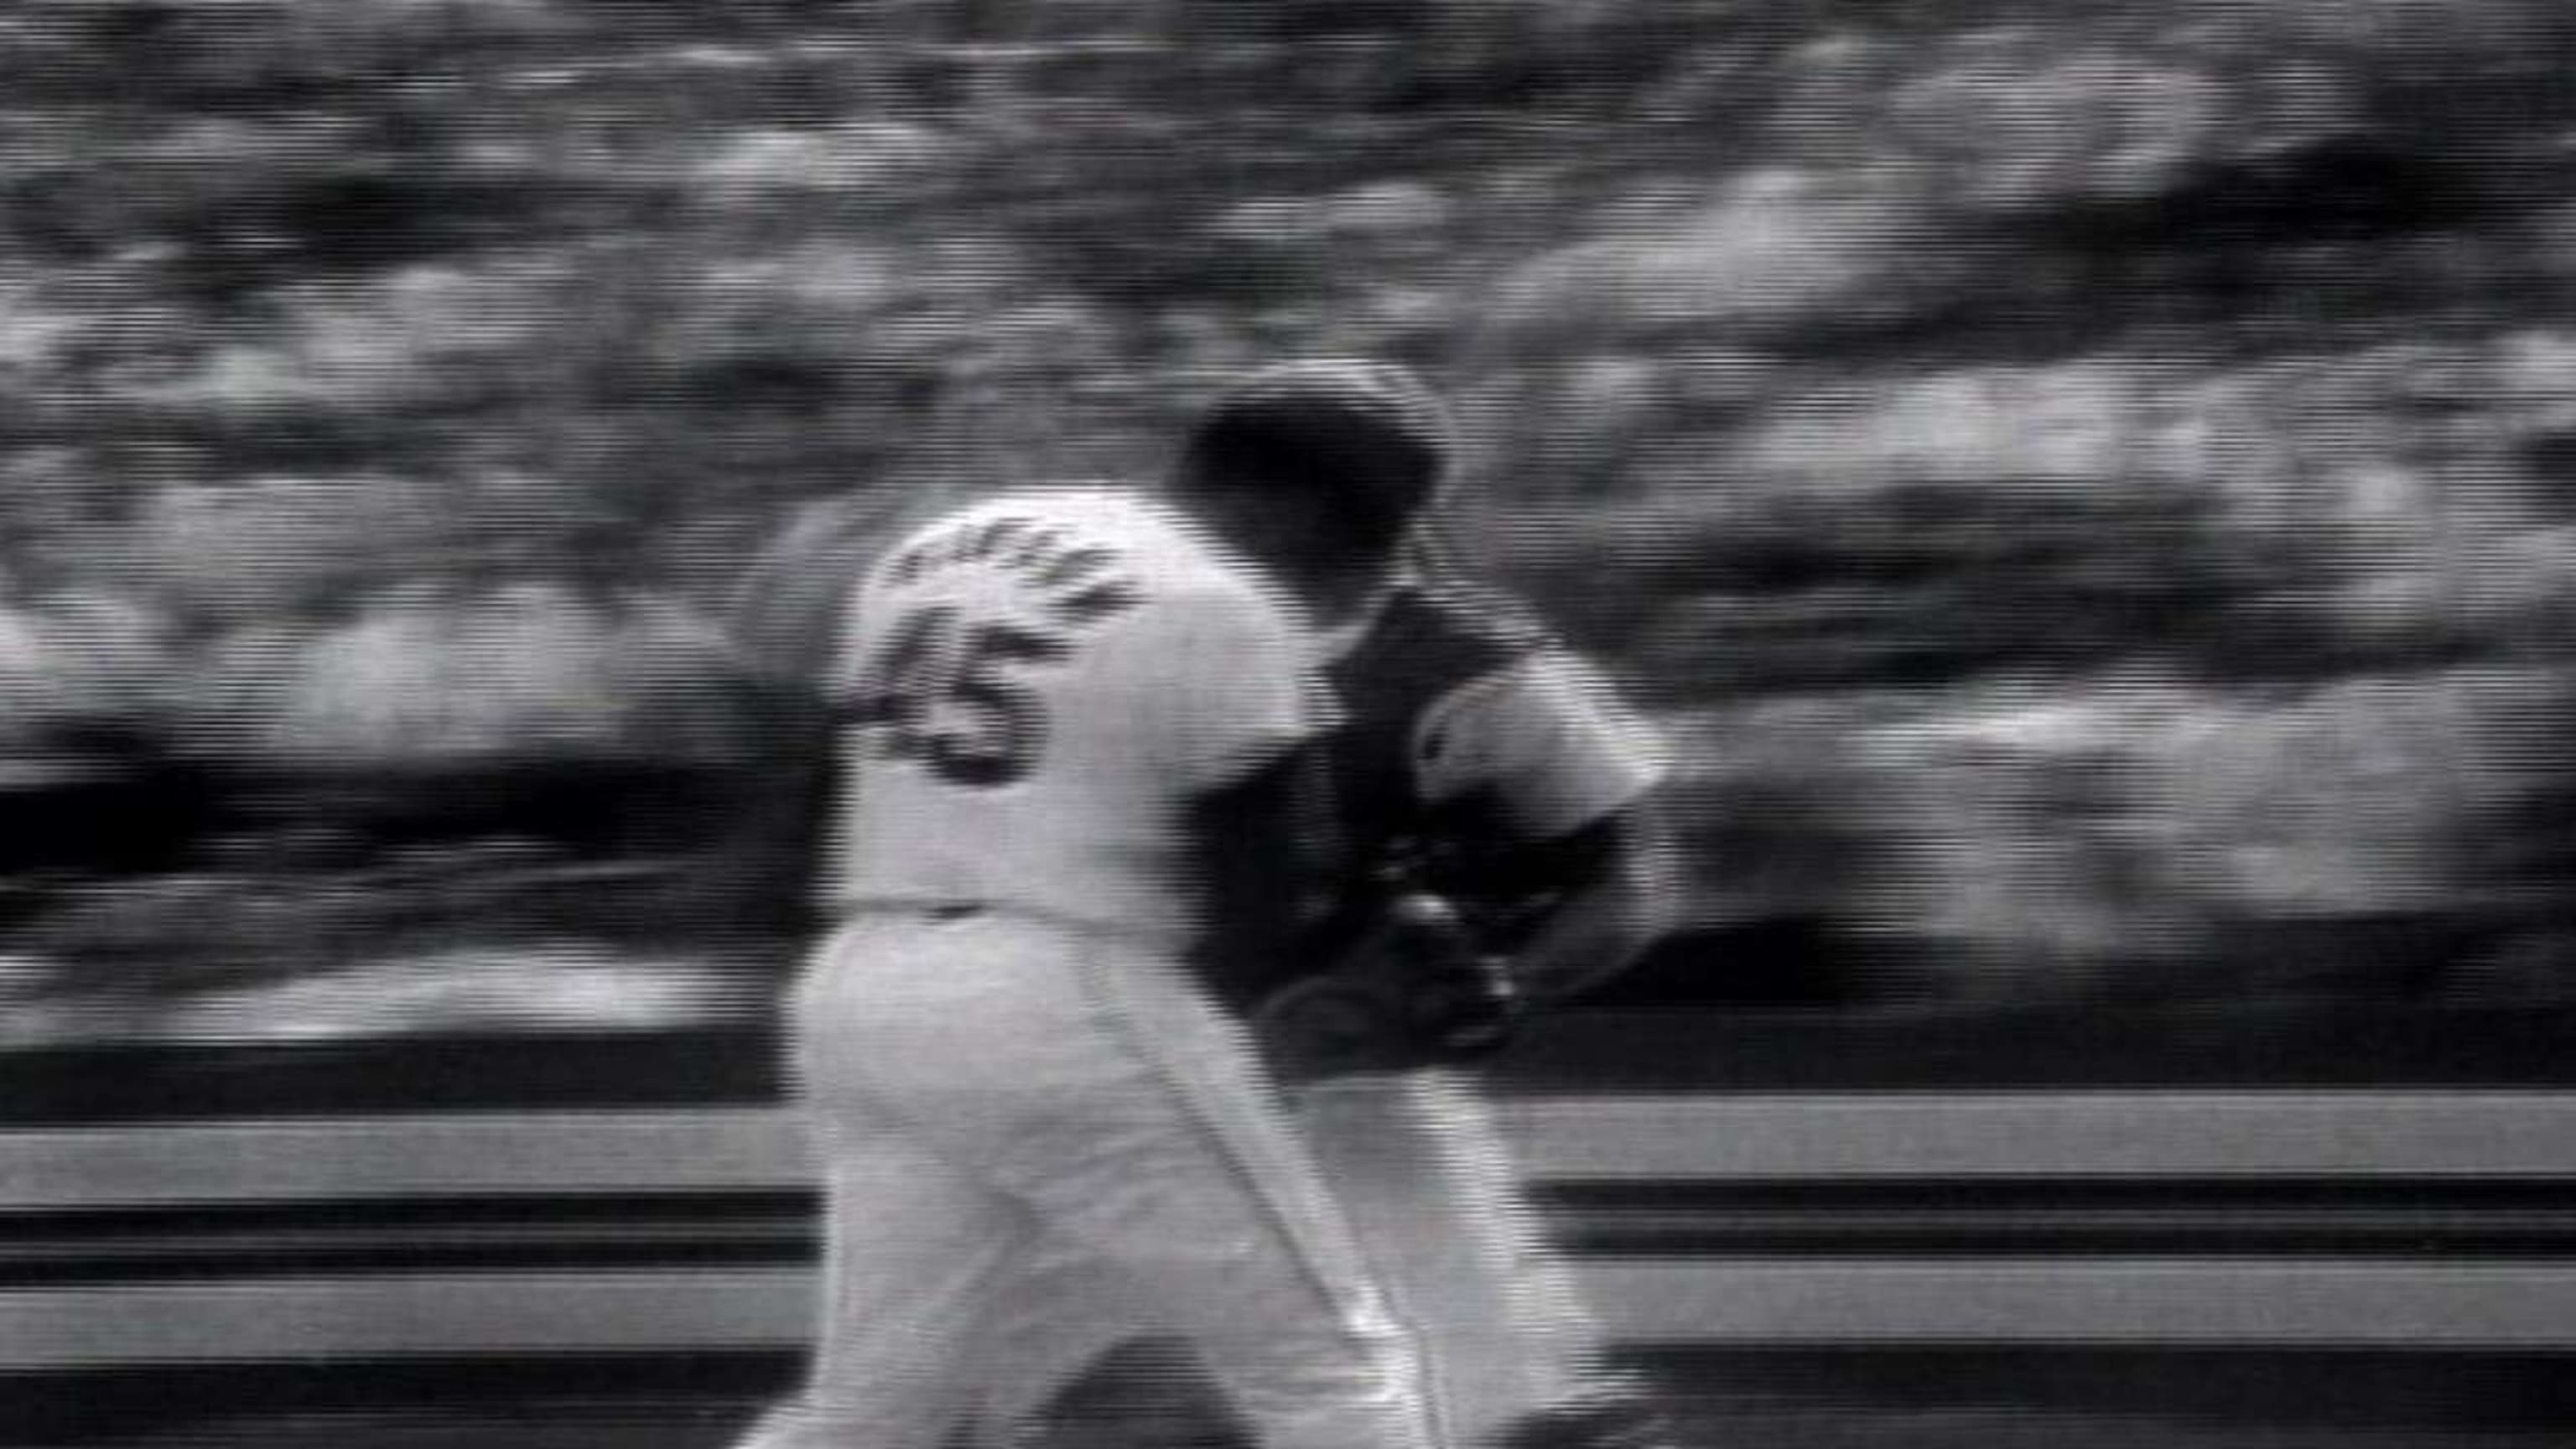 A look back at the 1968 World Series-champion Tigers